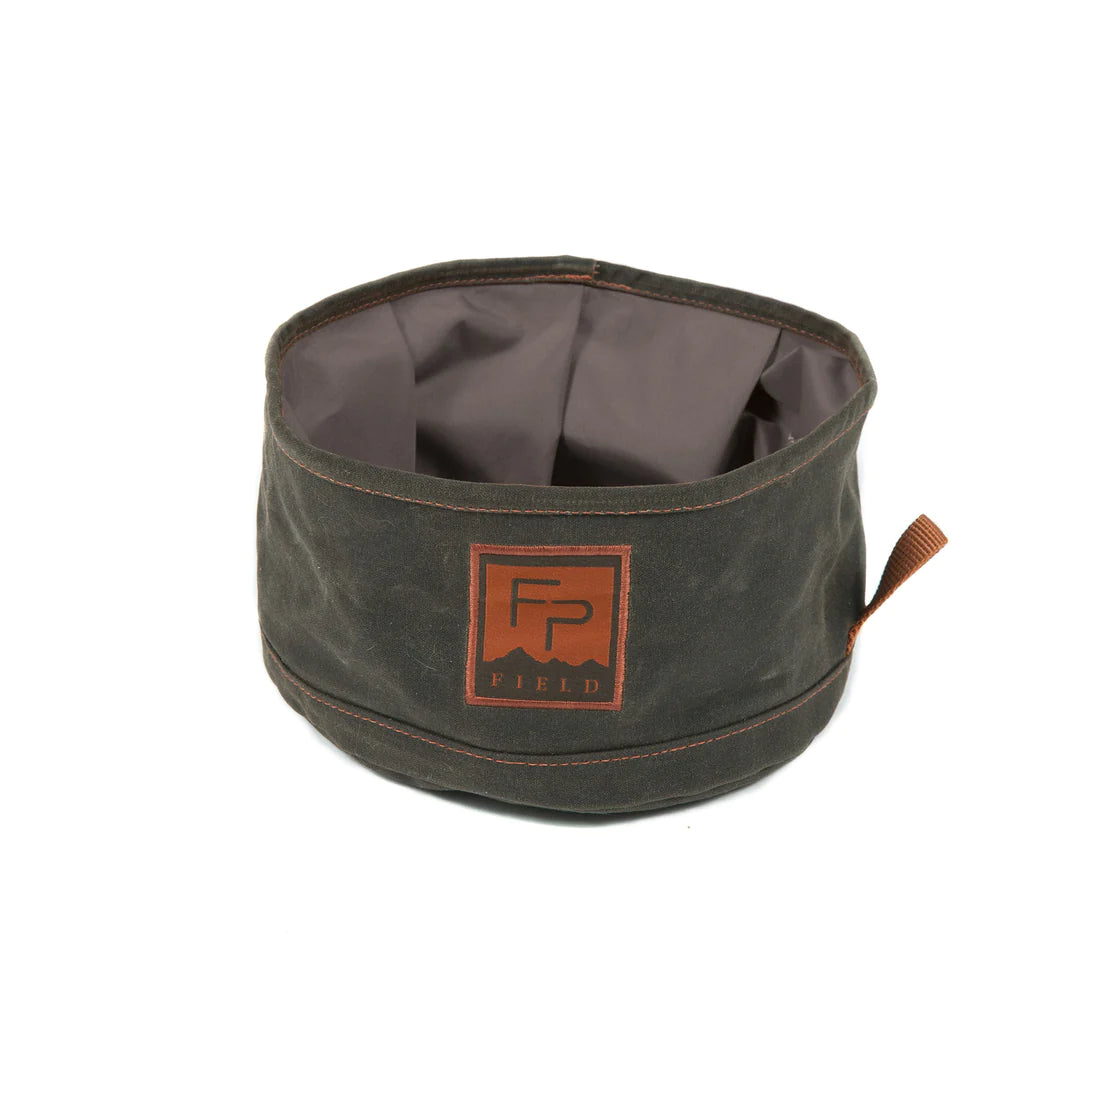 Fishpond Bow Wow Travel Food Bowl